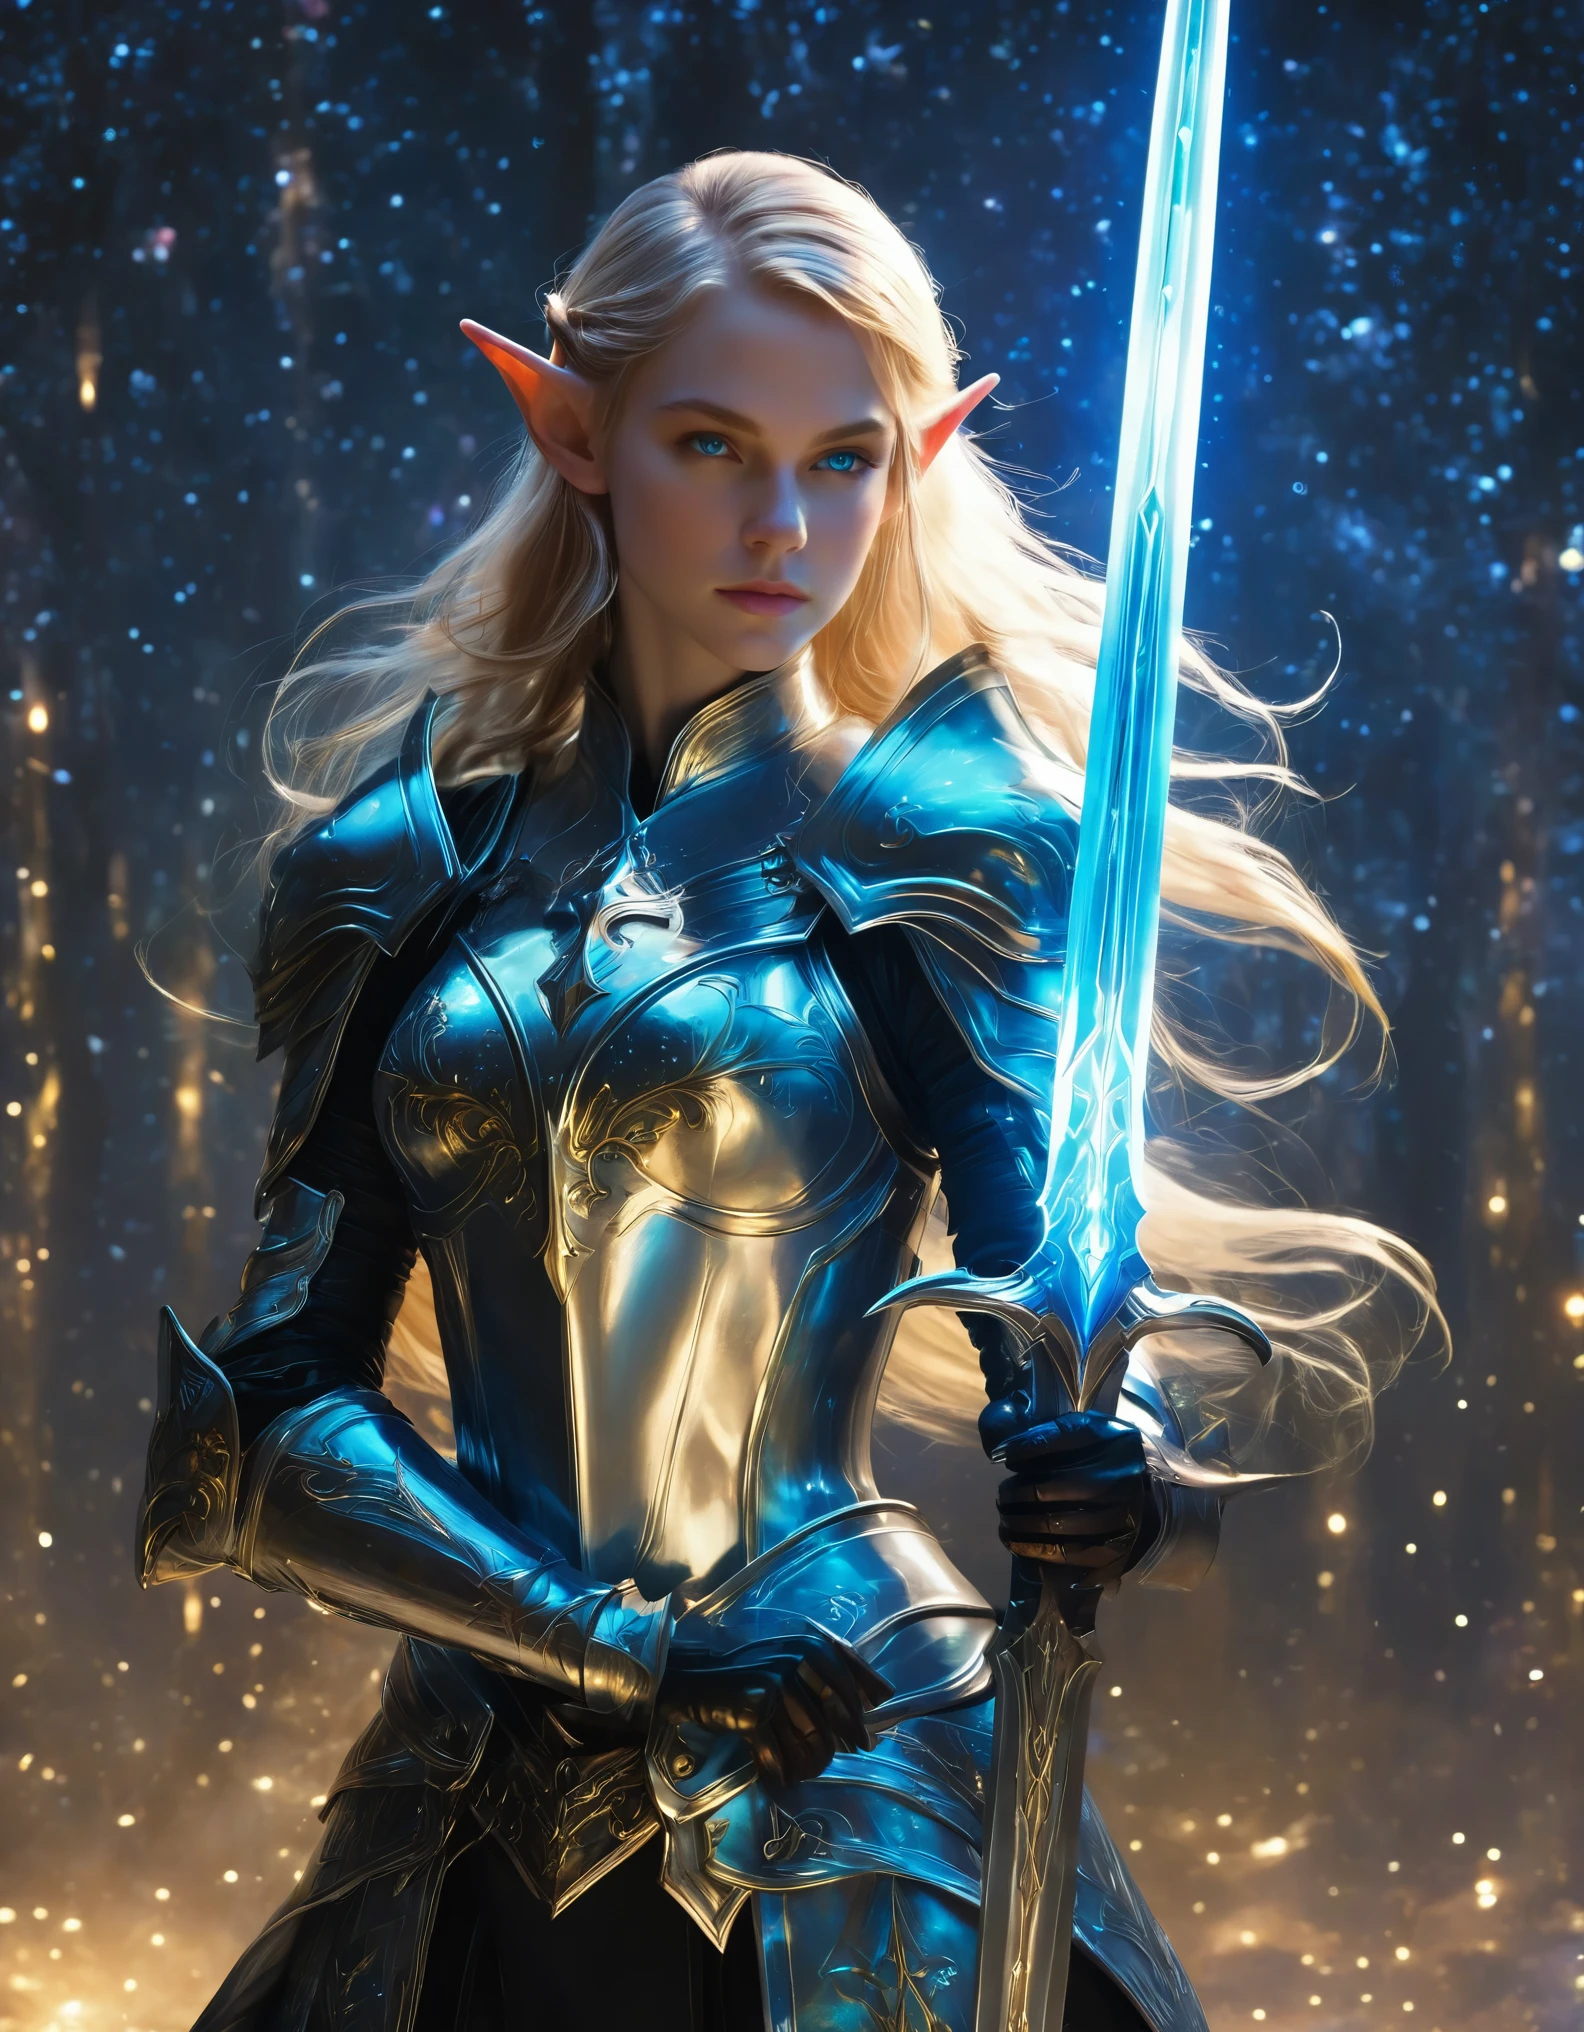 1beautiful girl,  solo，female swordmatomically correct，Blonde hair and blue eyes，Long hair，Elf ears，Star Armor，Transparent armor，side view，Hold the hilt of a sword in your hand，The blade glows，(body formed by galactic liquid mauevine and black metallic paint twisting into a beautiful interpretation of the female ), front view, fullbody， ((Best quality)), ((Masterpiece)), ((Realistic))，UHD，Galaxy background